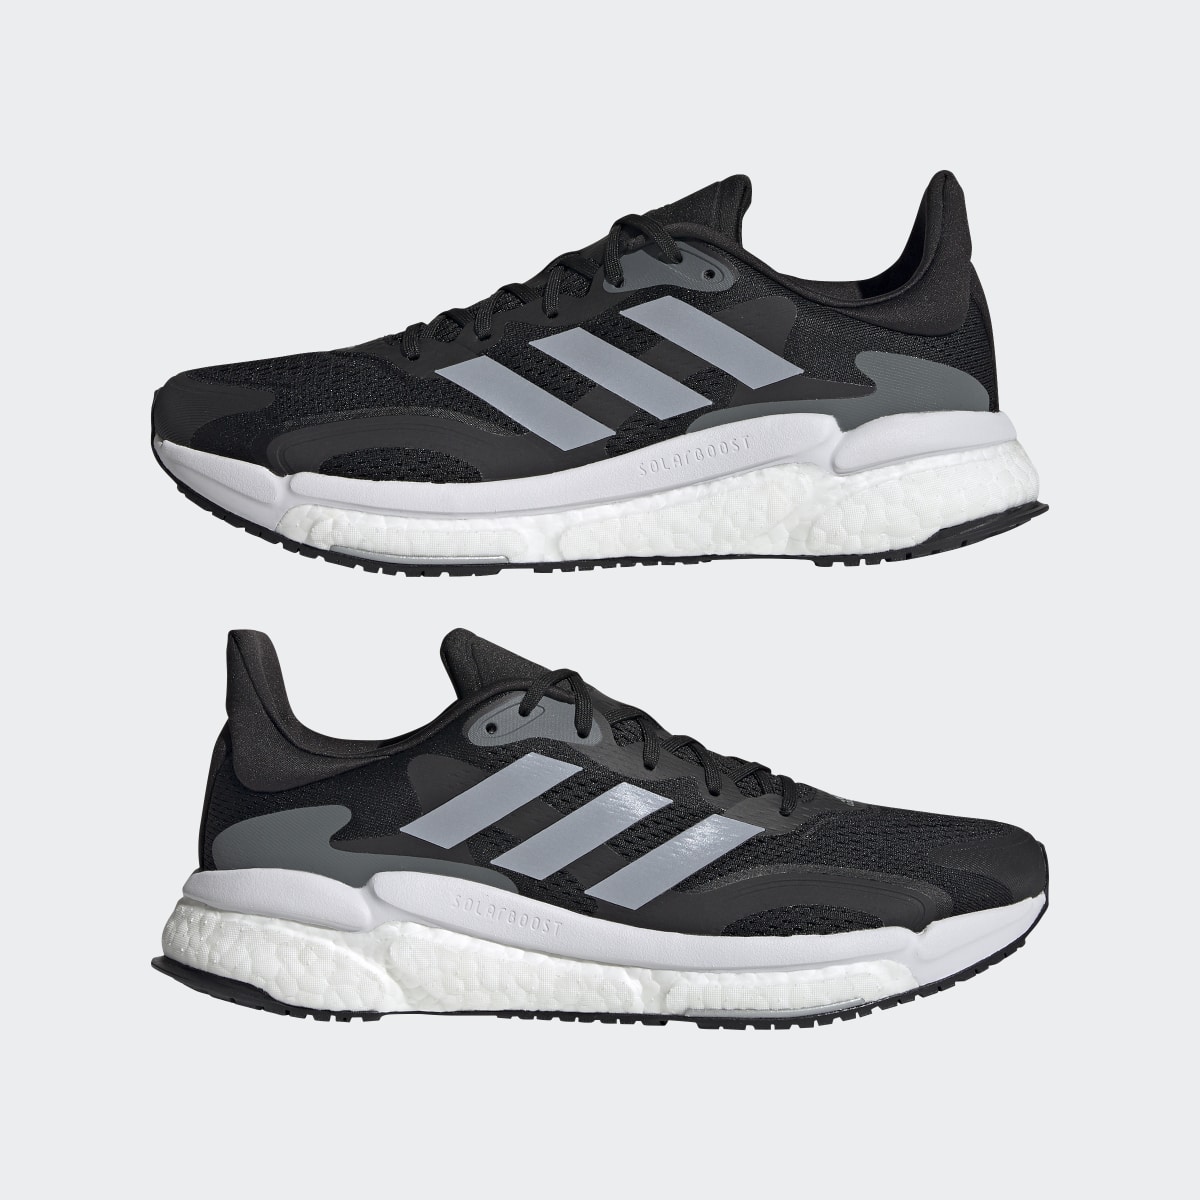 Adidas SolarBoost 3 Shoes. 9